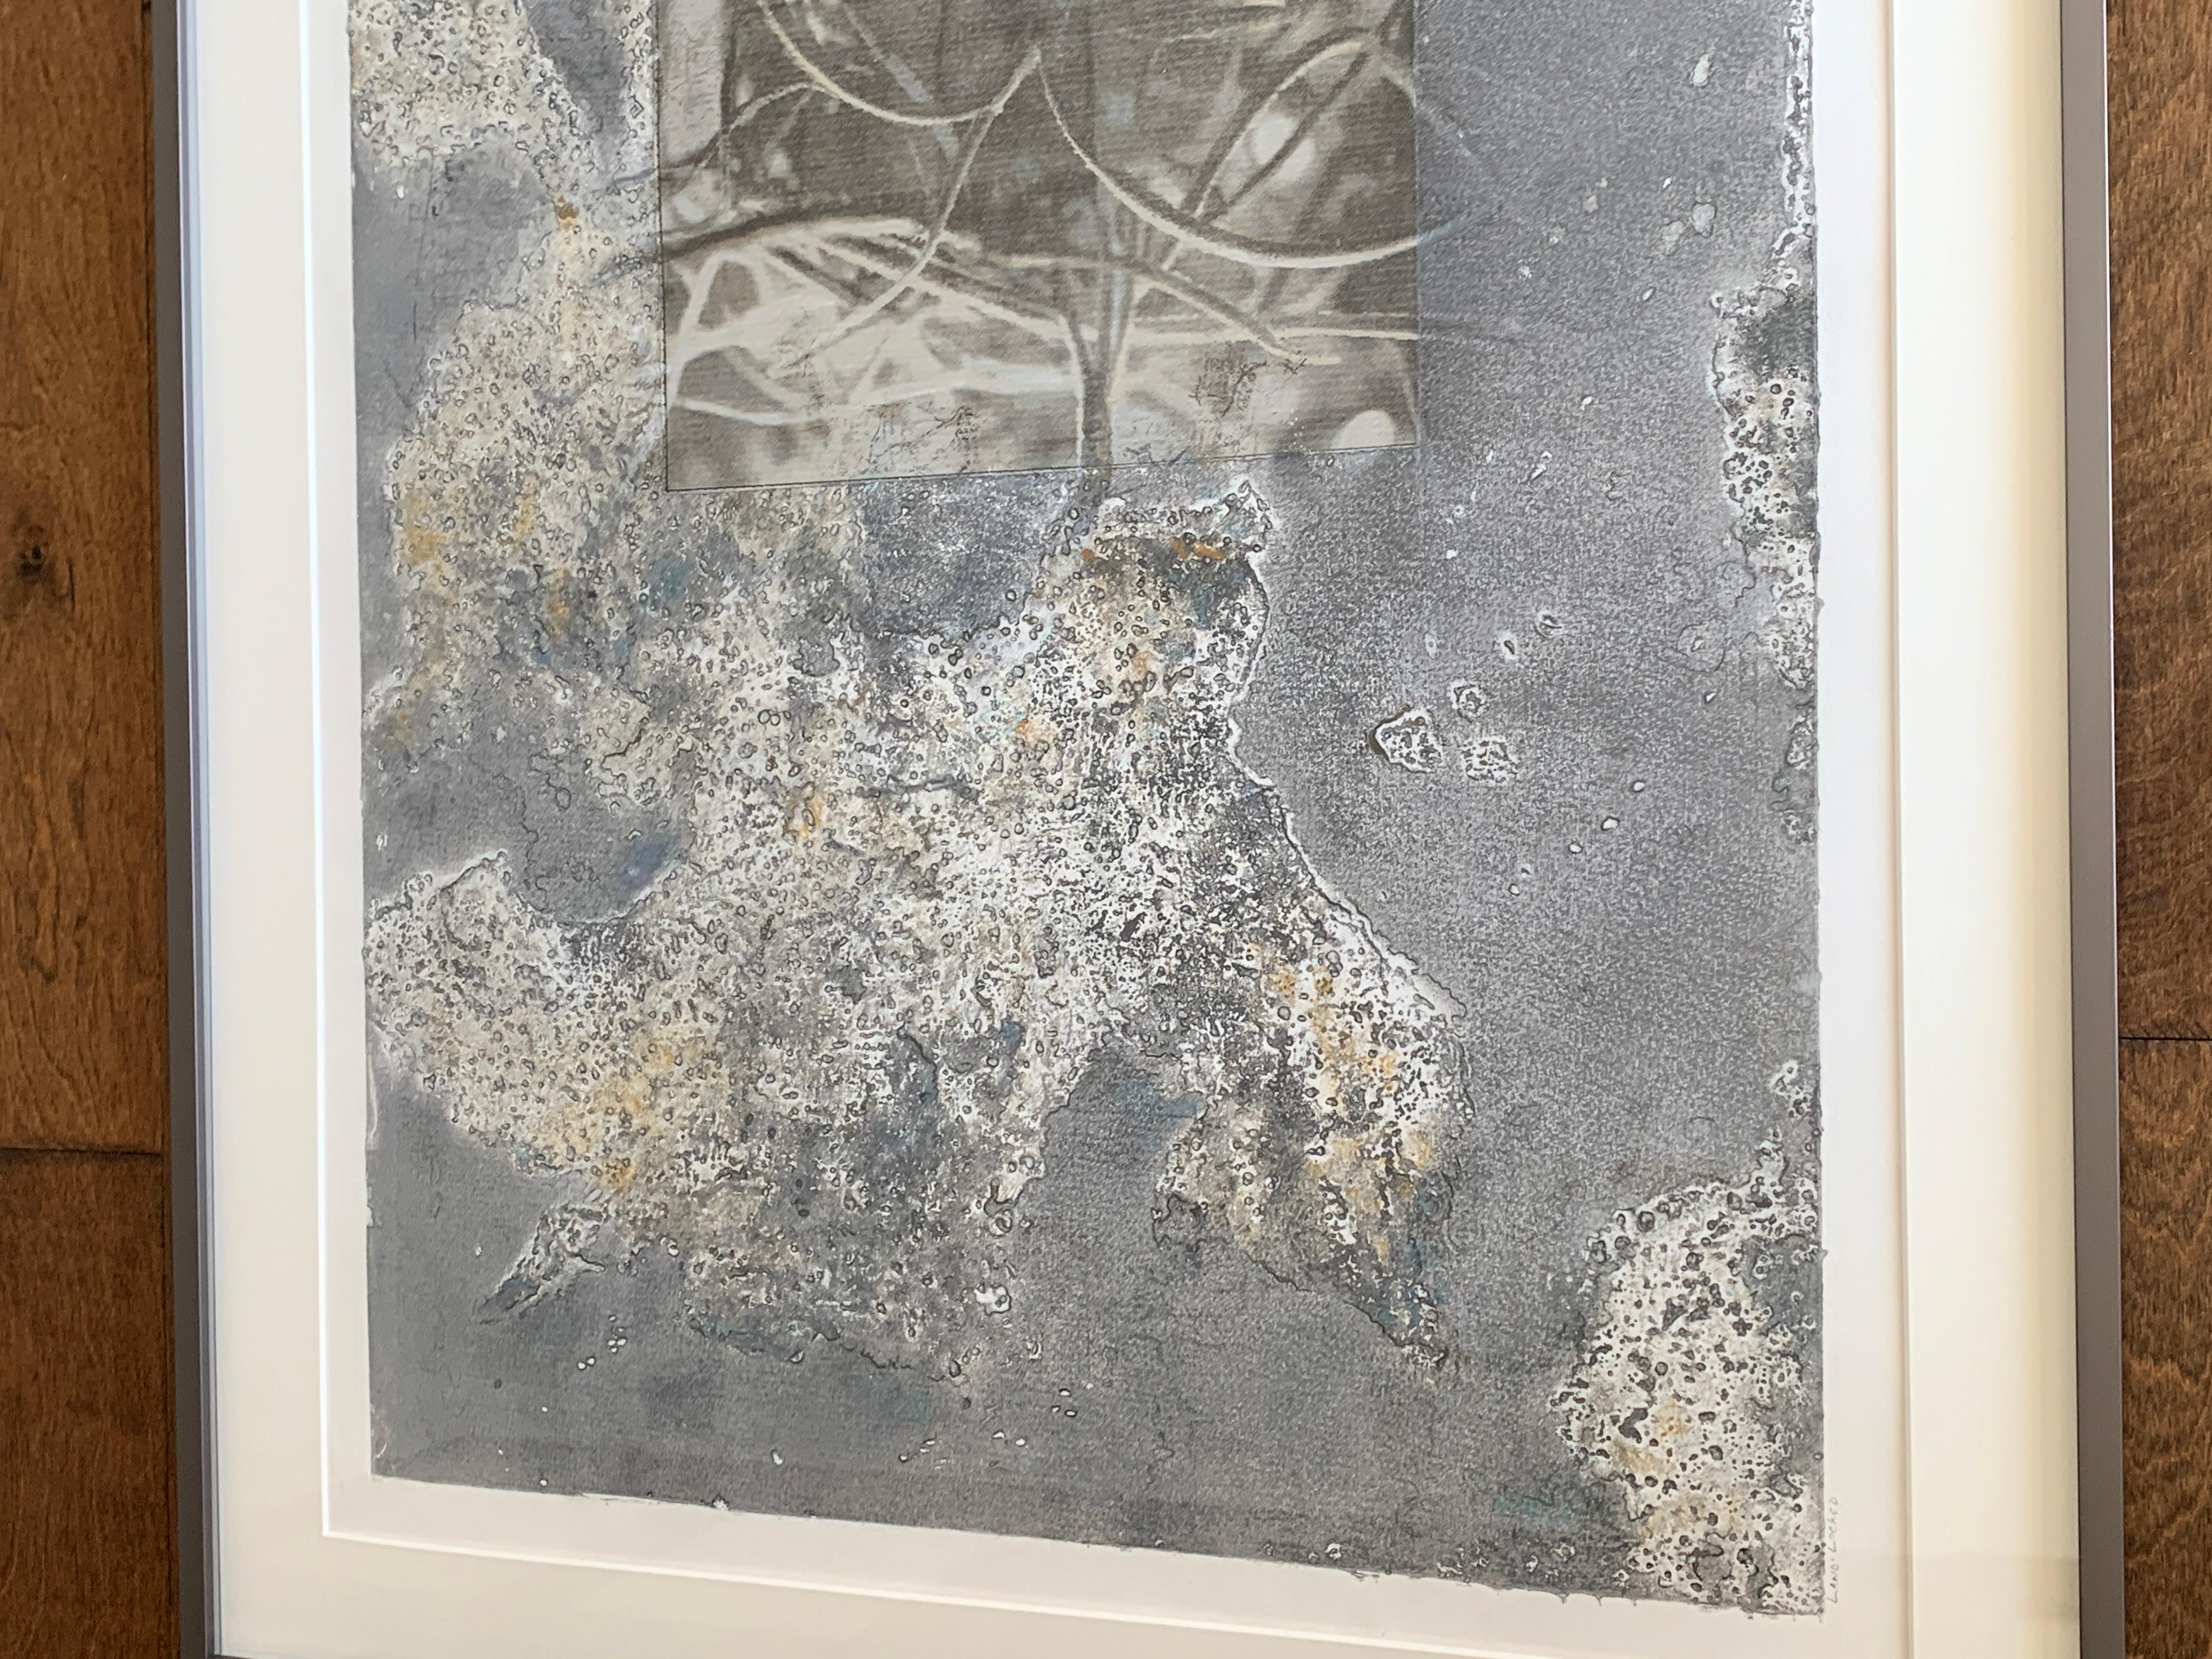 'Land Locked', Laurie Carnohan, 2017.
Edition: 1/1
Collagraph with mixed media.
Measures: 3.75in W x 24.25in H x 1.25in D (framed)
Signed, dated, and framed.

You can find more original work by this artist in our L'Objet Bleu storefront on